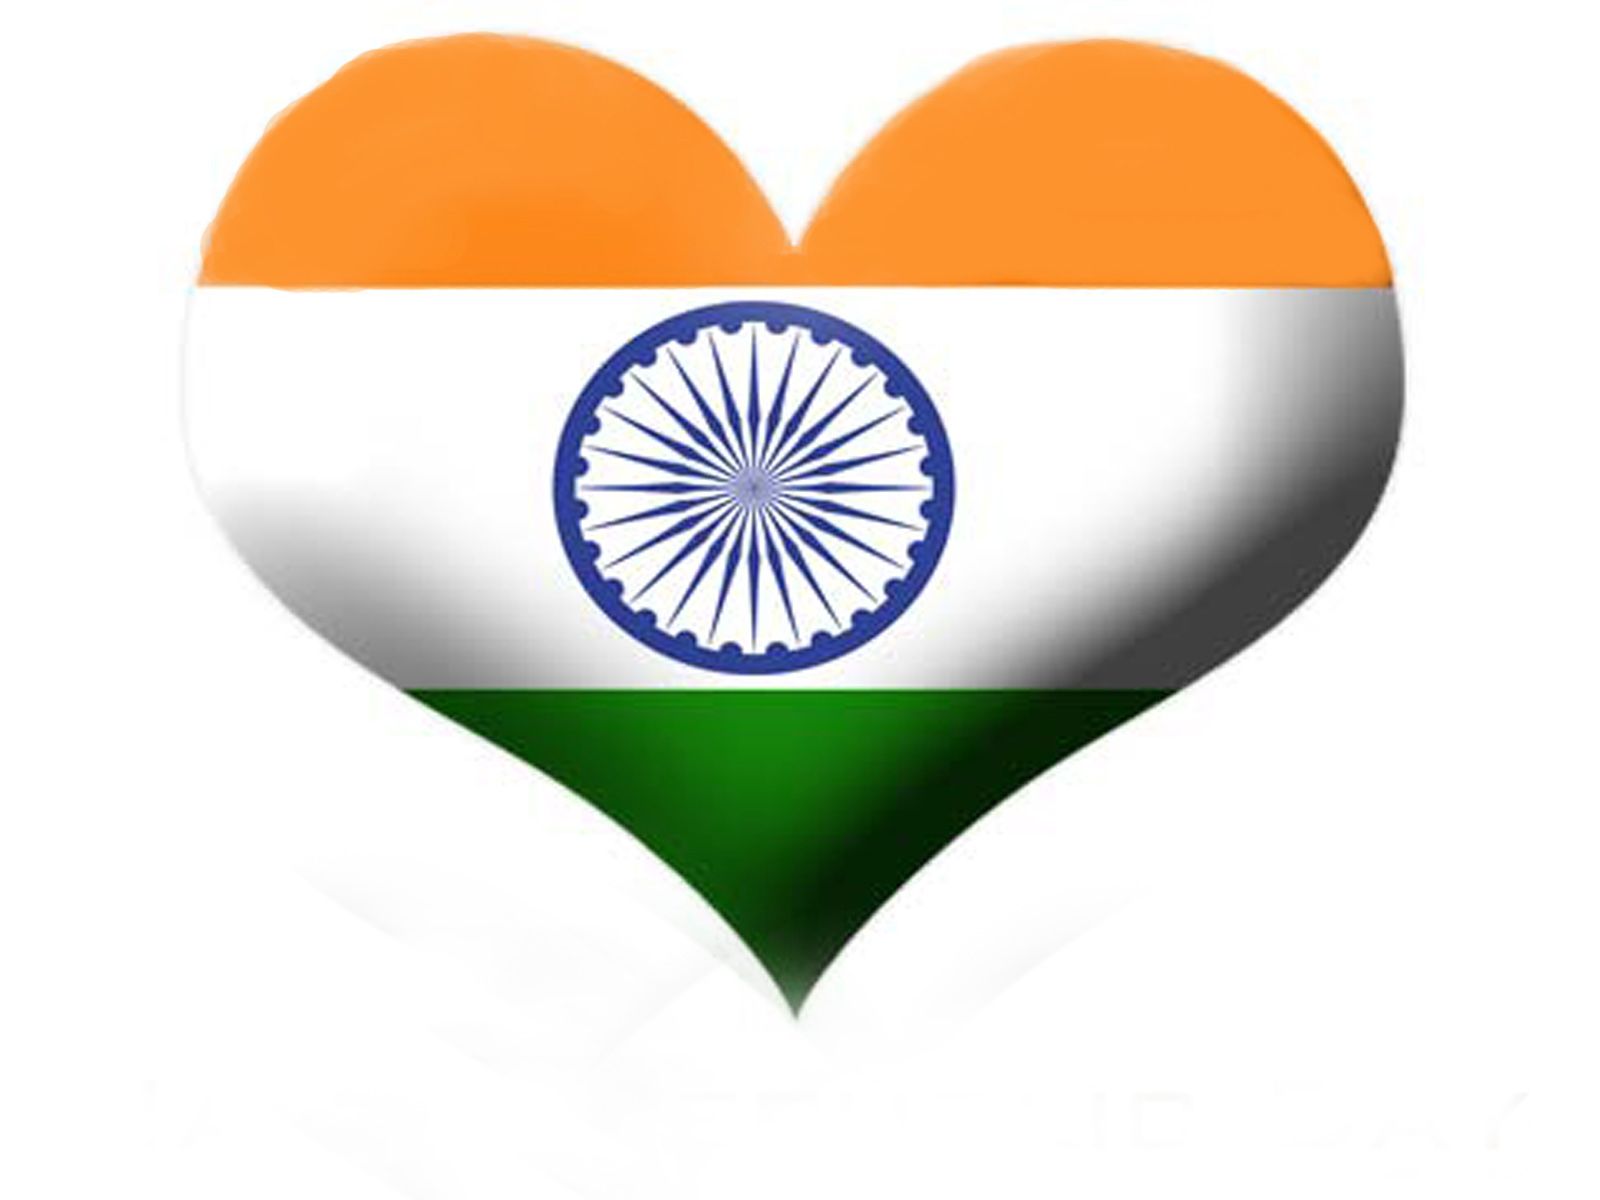 Hd Widescreen Images Collection Of Indian Flag - Happy Independence Day Dil - HD Wallpaper 